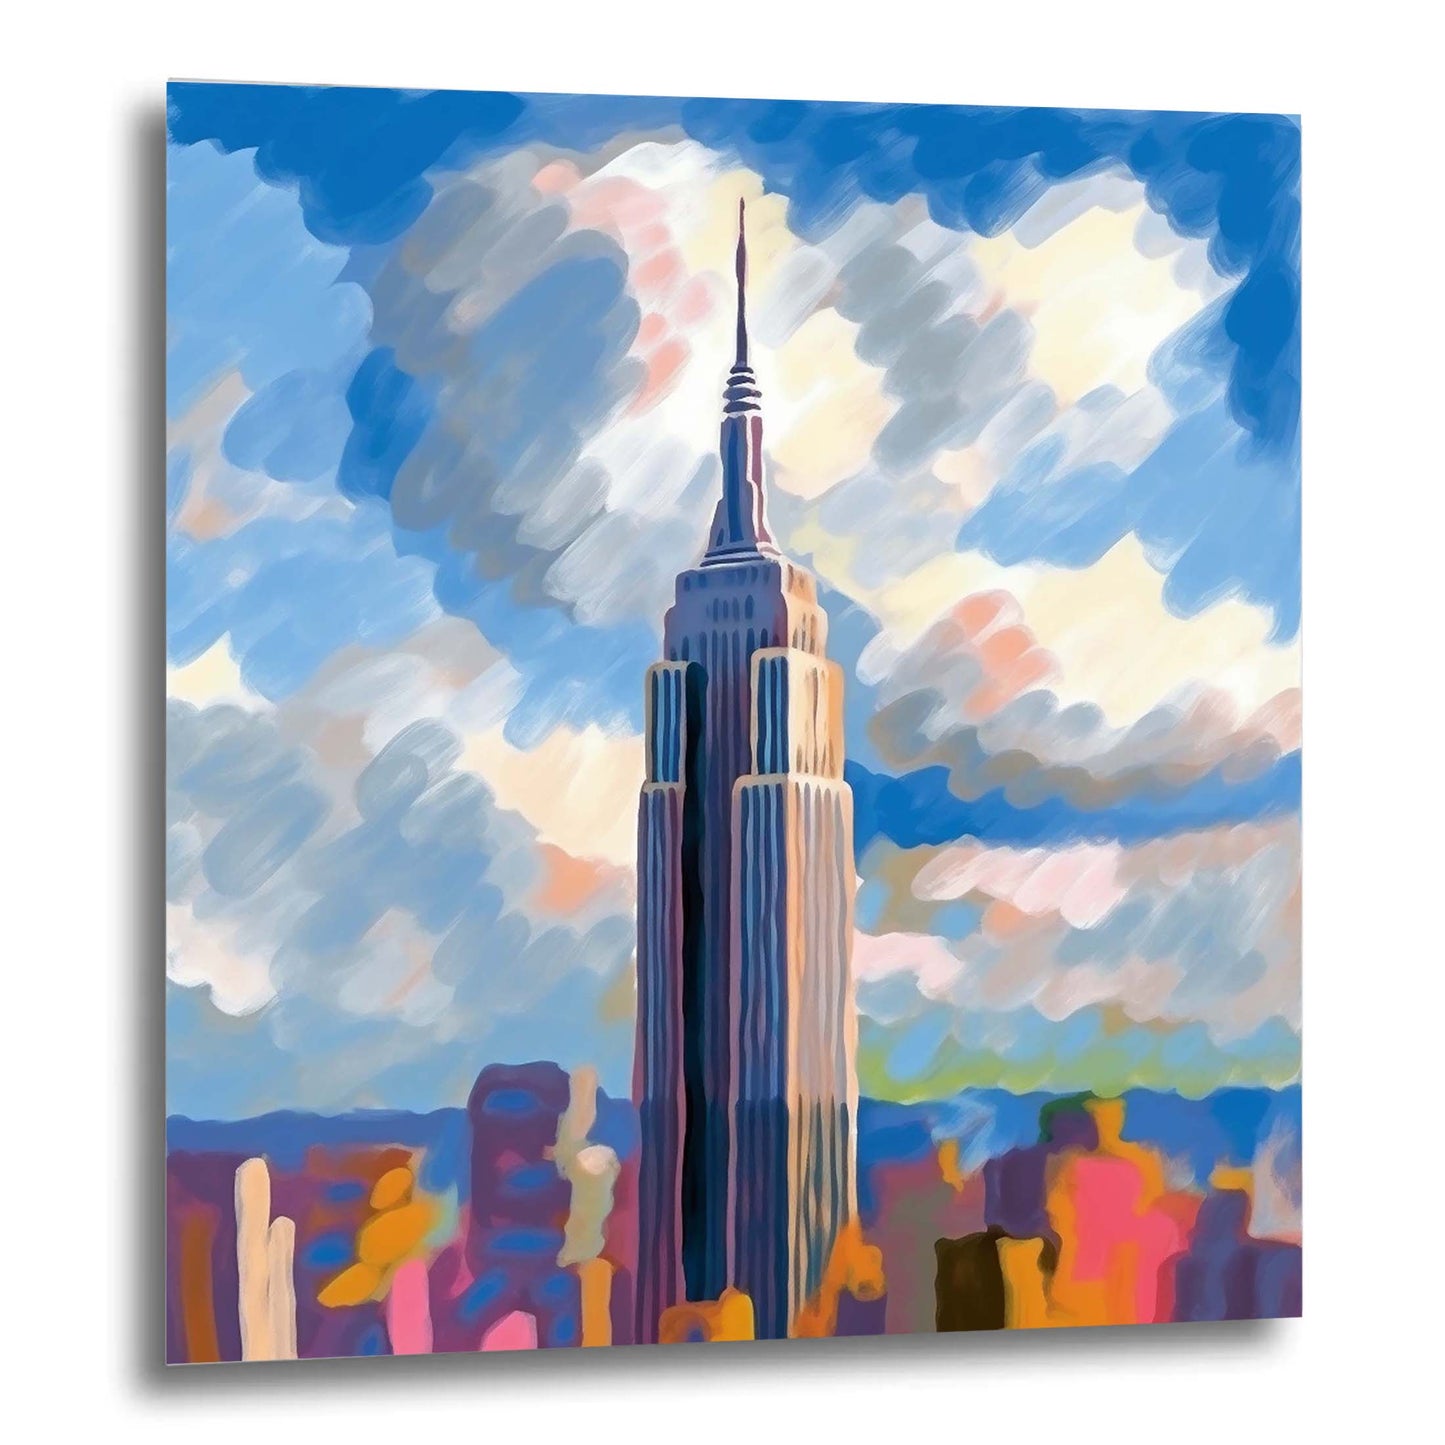 New York Empire State Building - mural in the style of impressionism